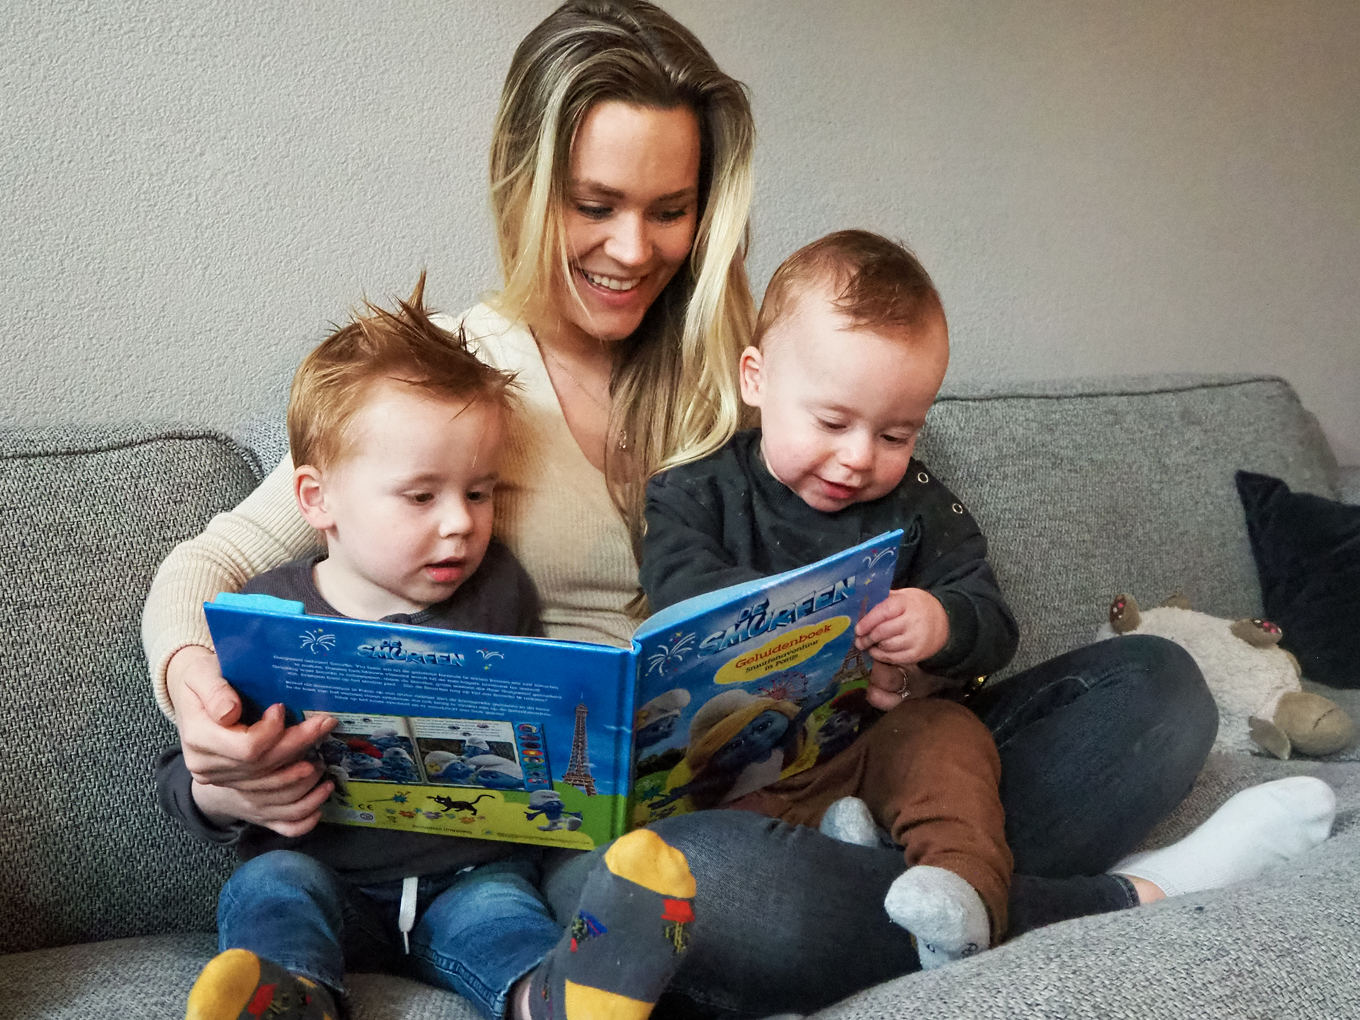 Calling all the Super Moms | Bugaboo Blog